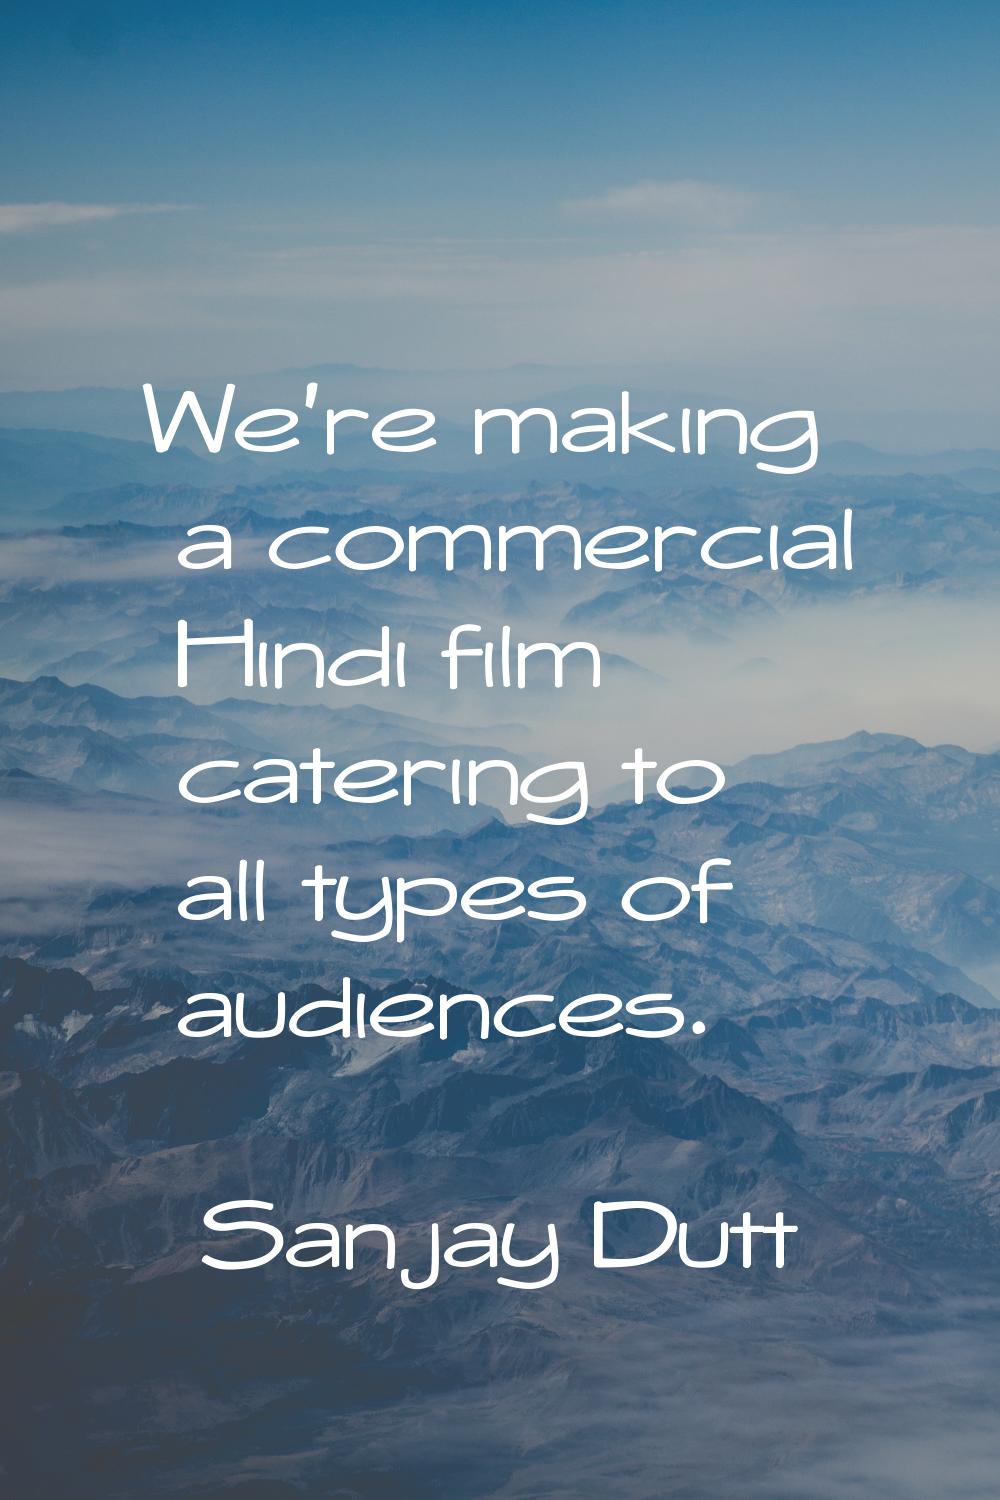 We're making a commercial Hindi film catering to all types of audiences.